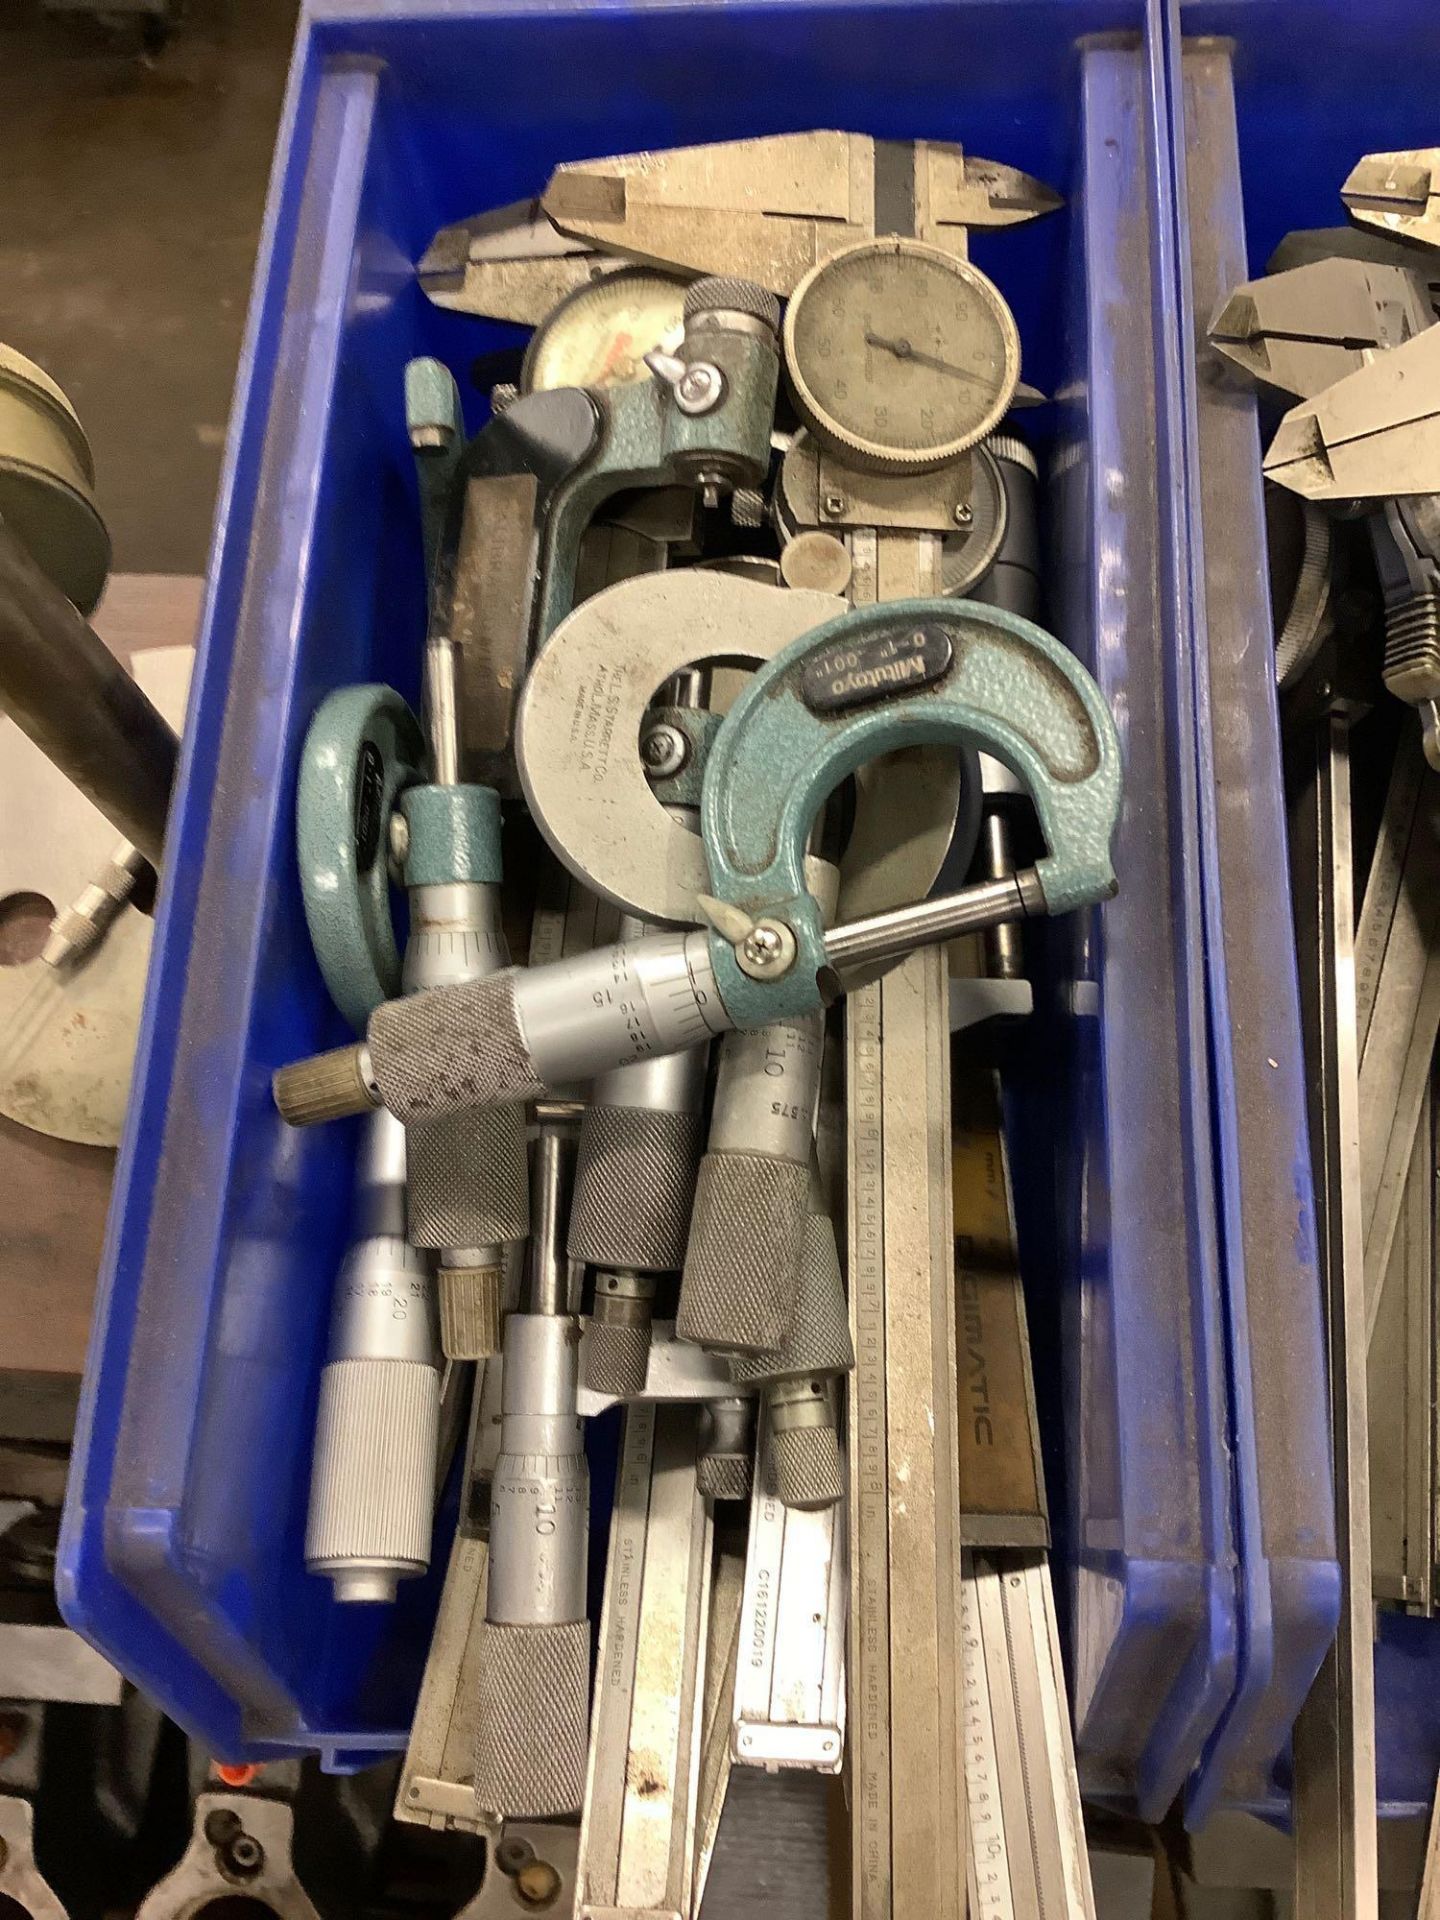 Lot of Caliphers, Micrometers, and Gauges - Image 2 of 3